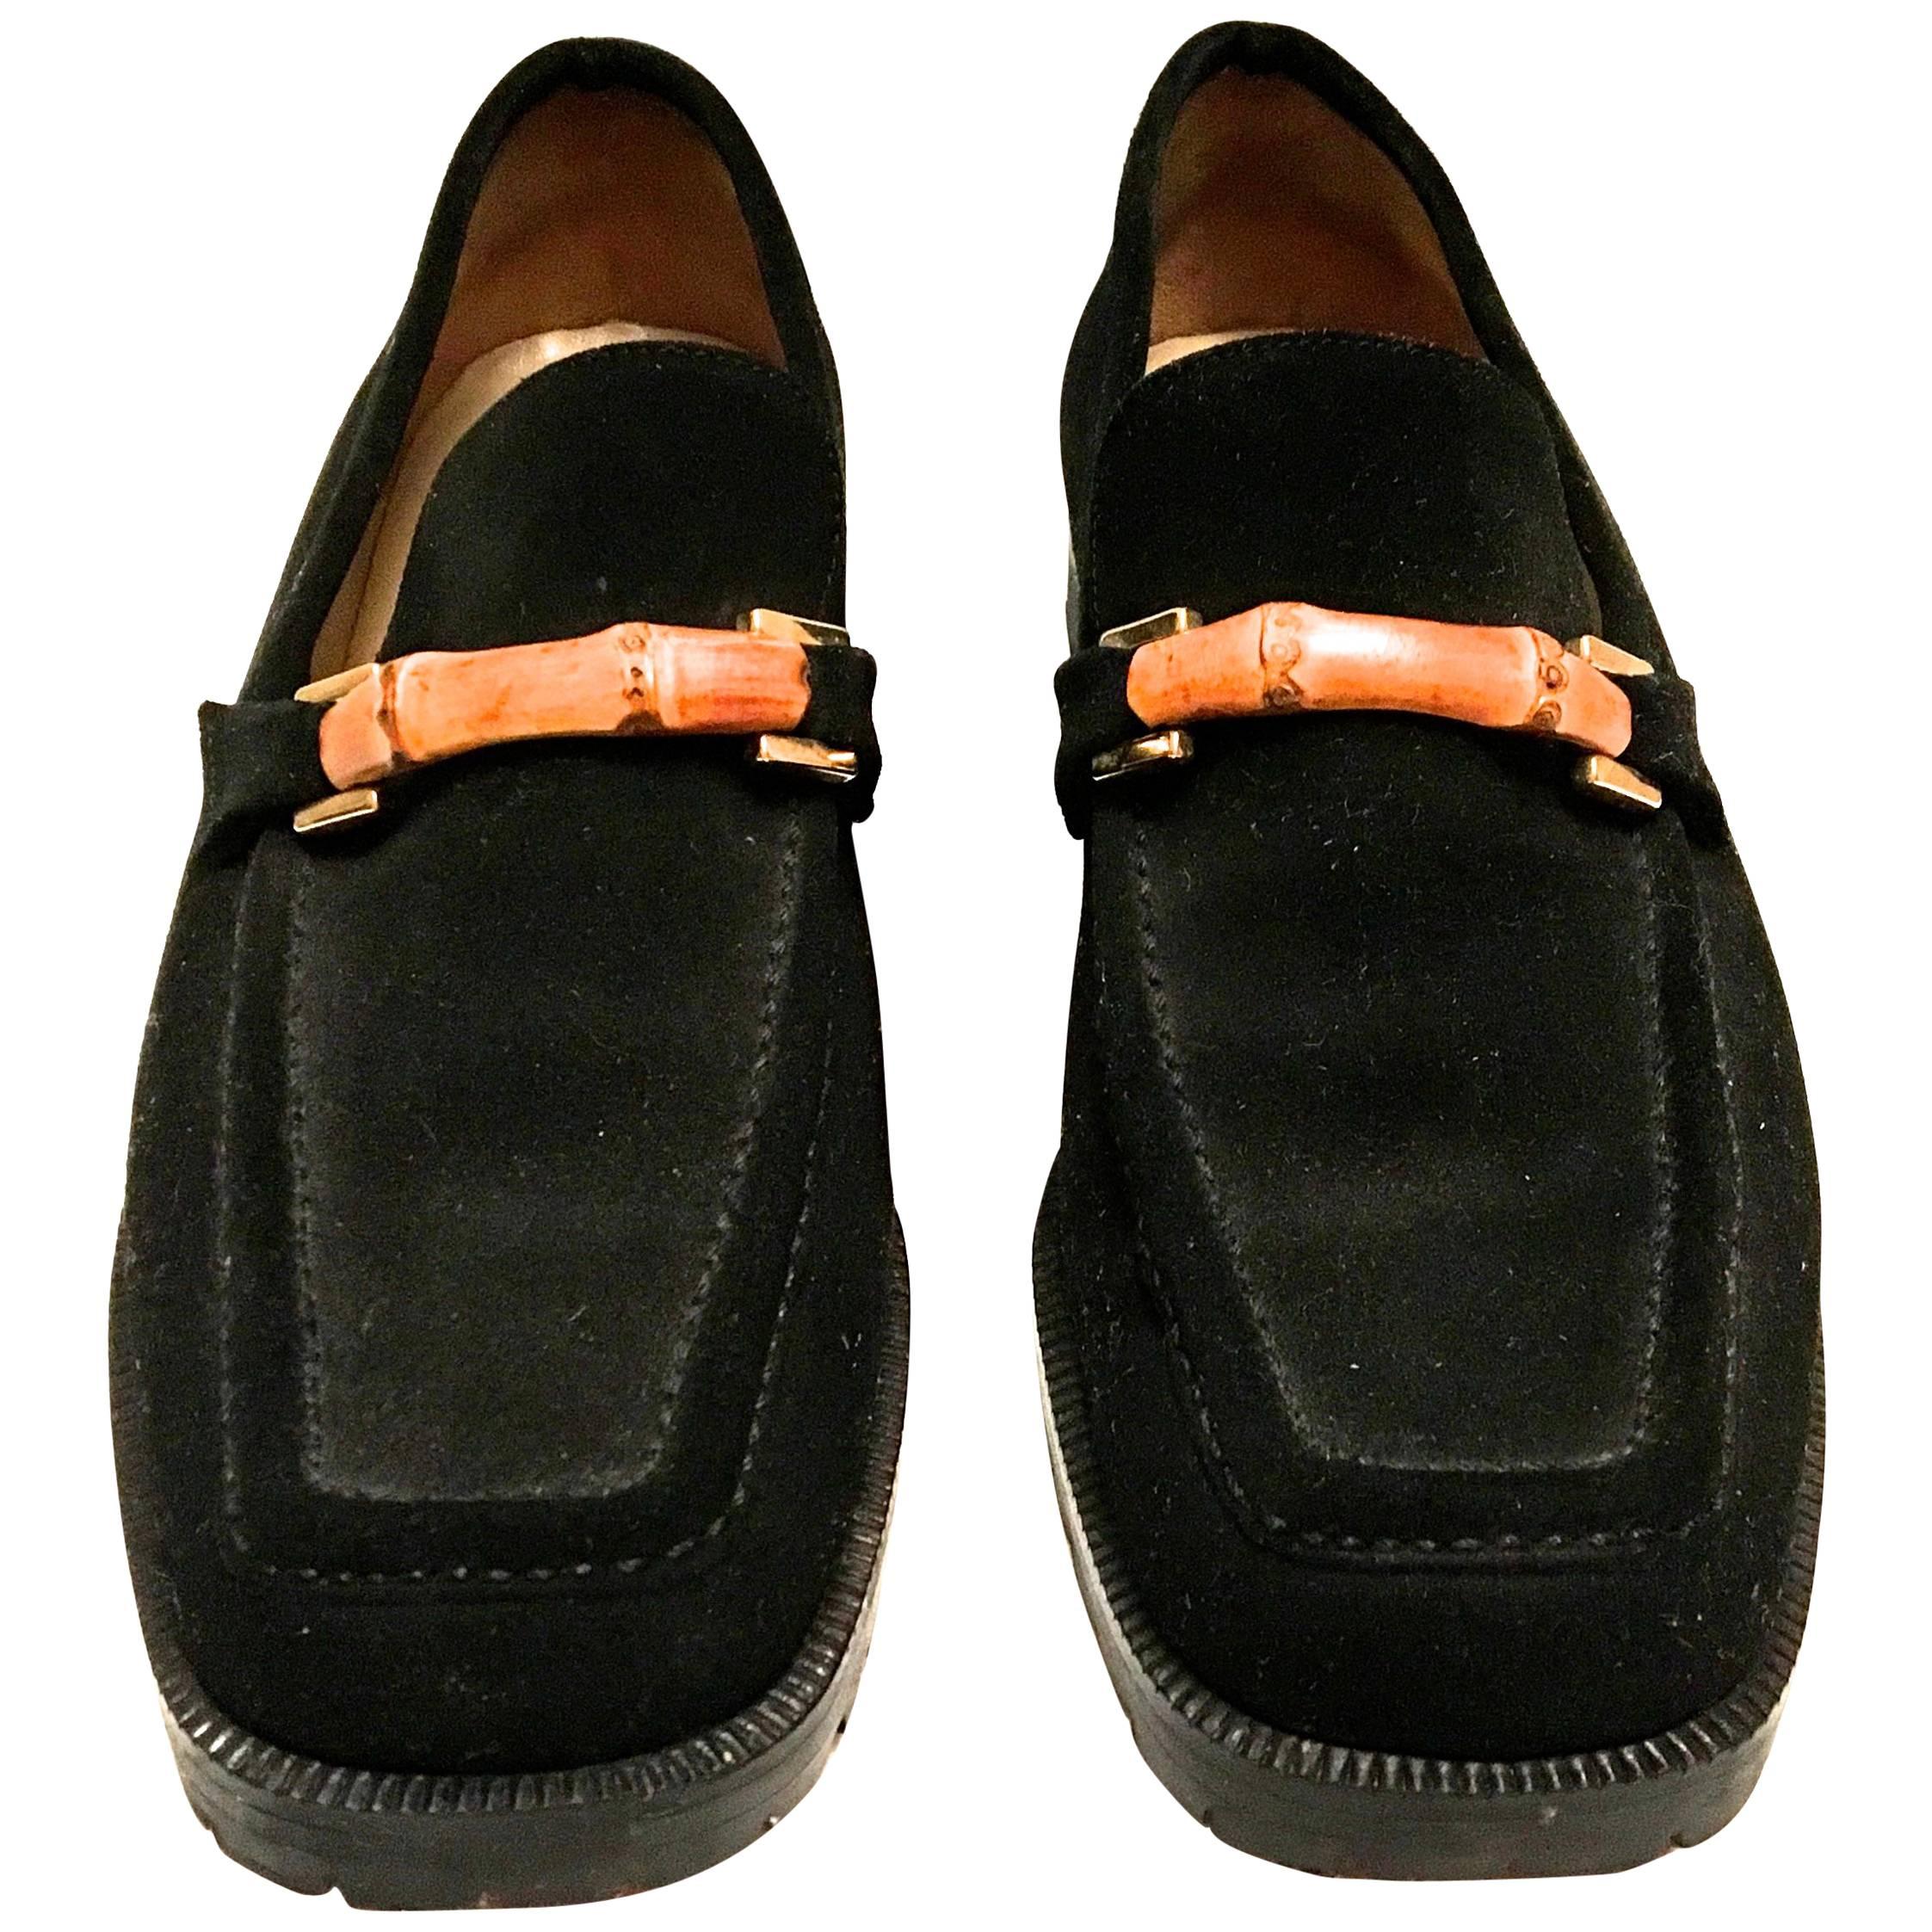 Gucci  Shoes Loafers Black Suede Bamboo 36